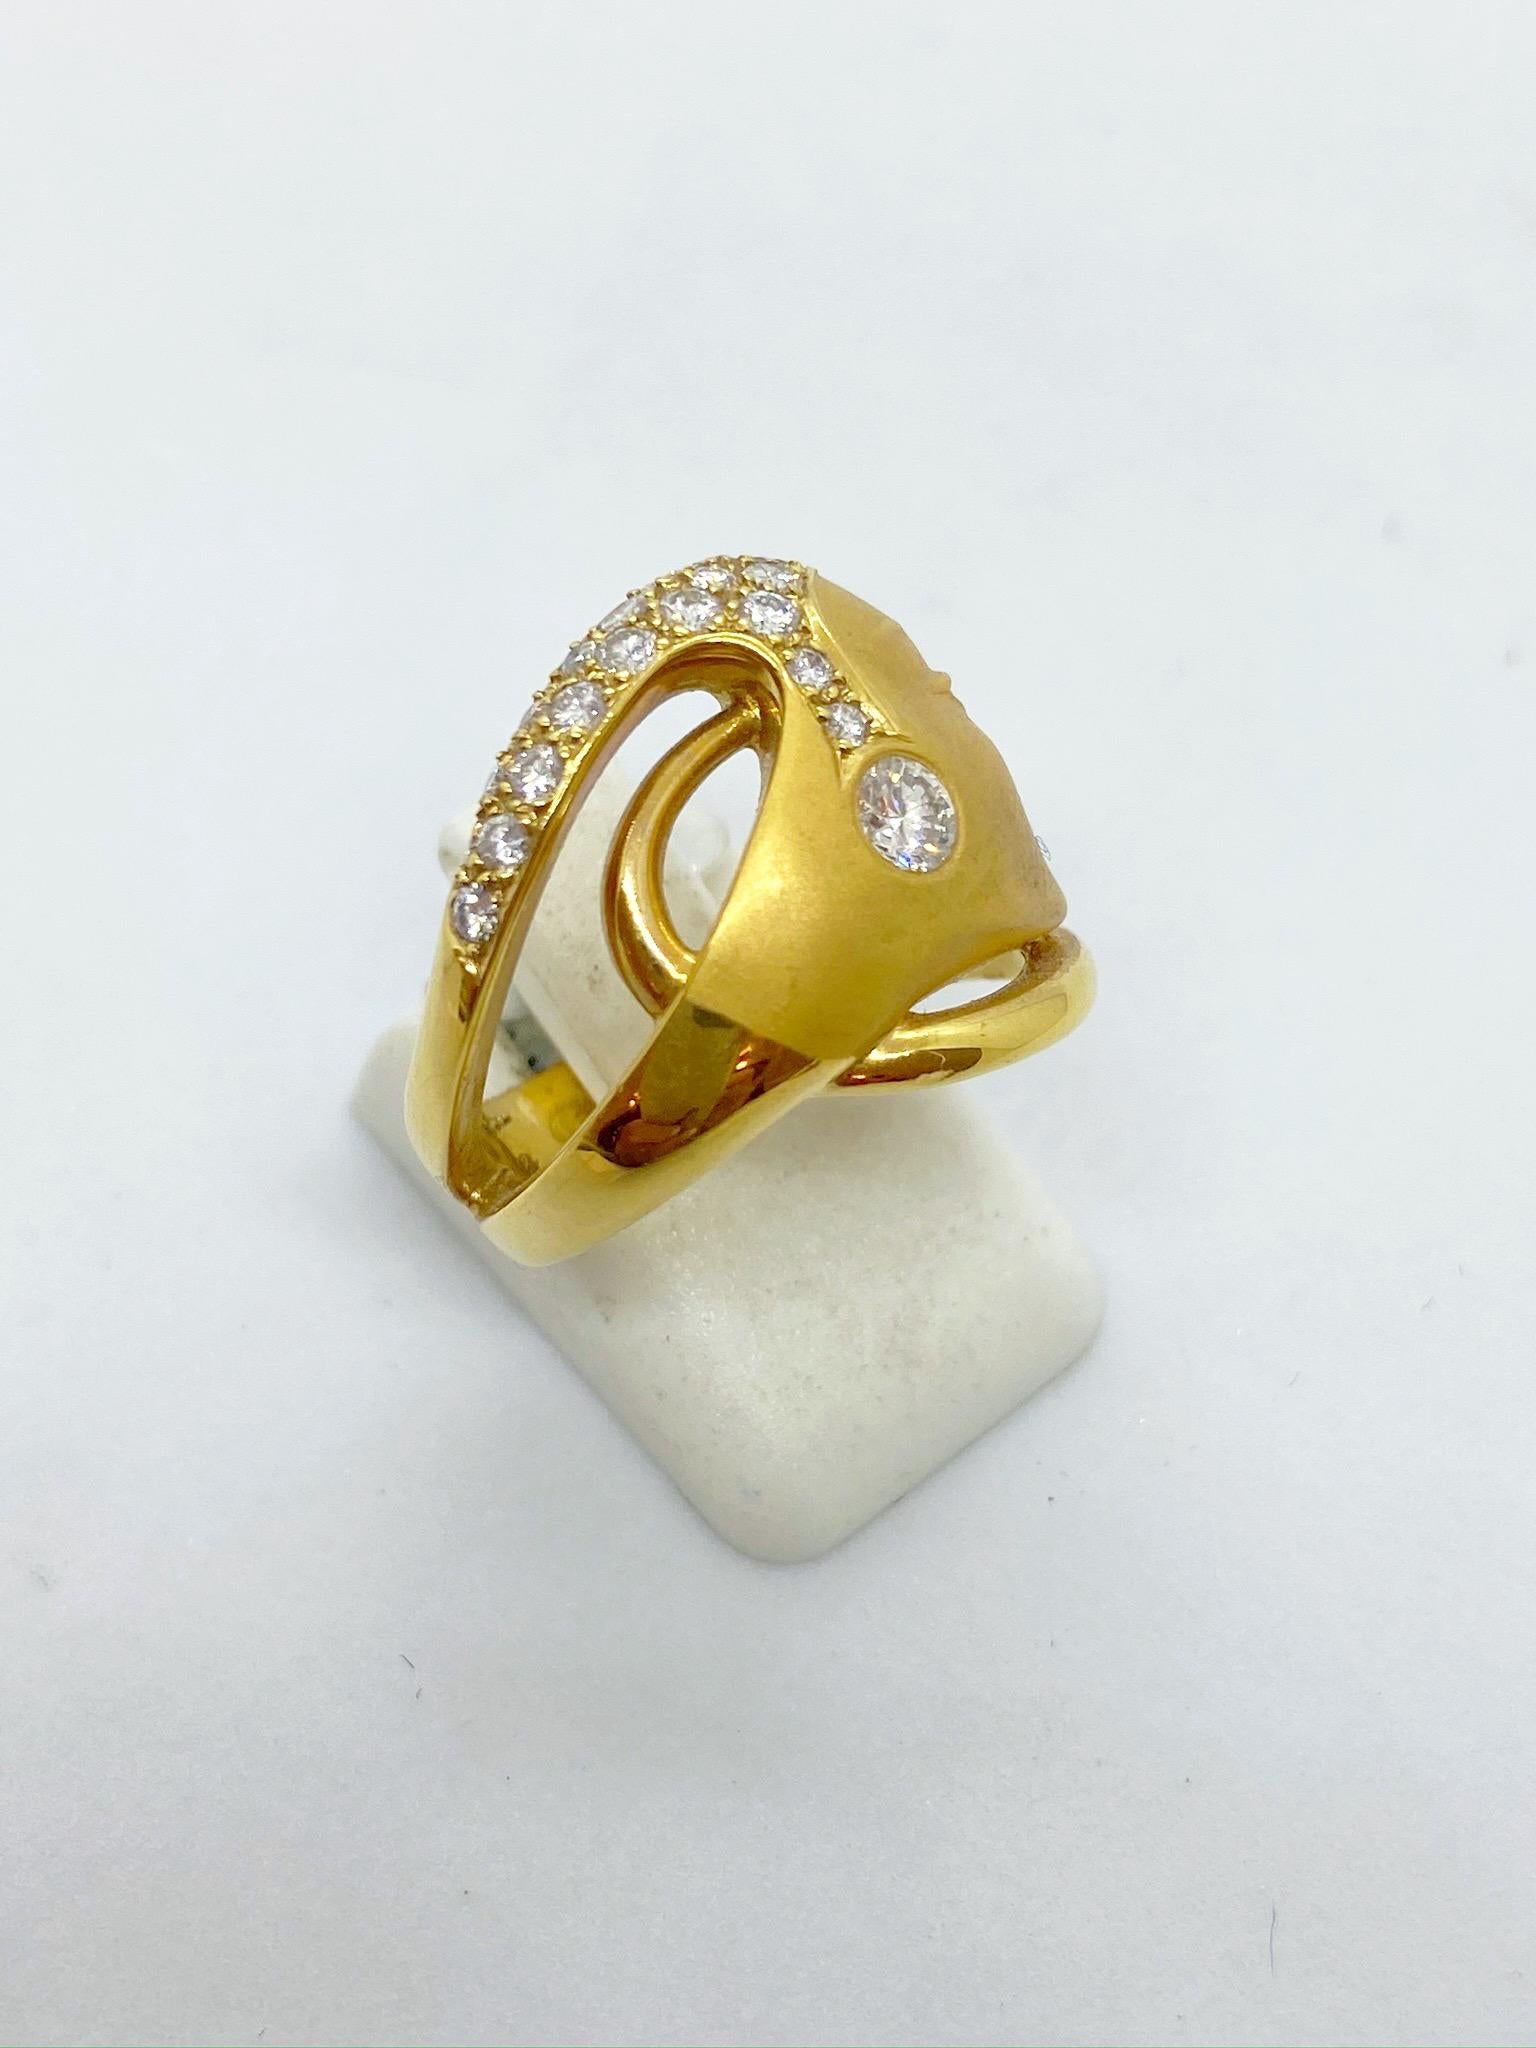 Carrera Y Carrera has built its famous name on figurative designs, an obsession with surface finishes, and a compelling way of seeing beauty in art and nature. This 18 karat yellow gold ring is a perfect example of Carrera's iconic designs. This